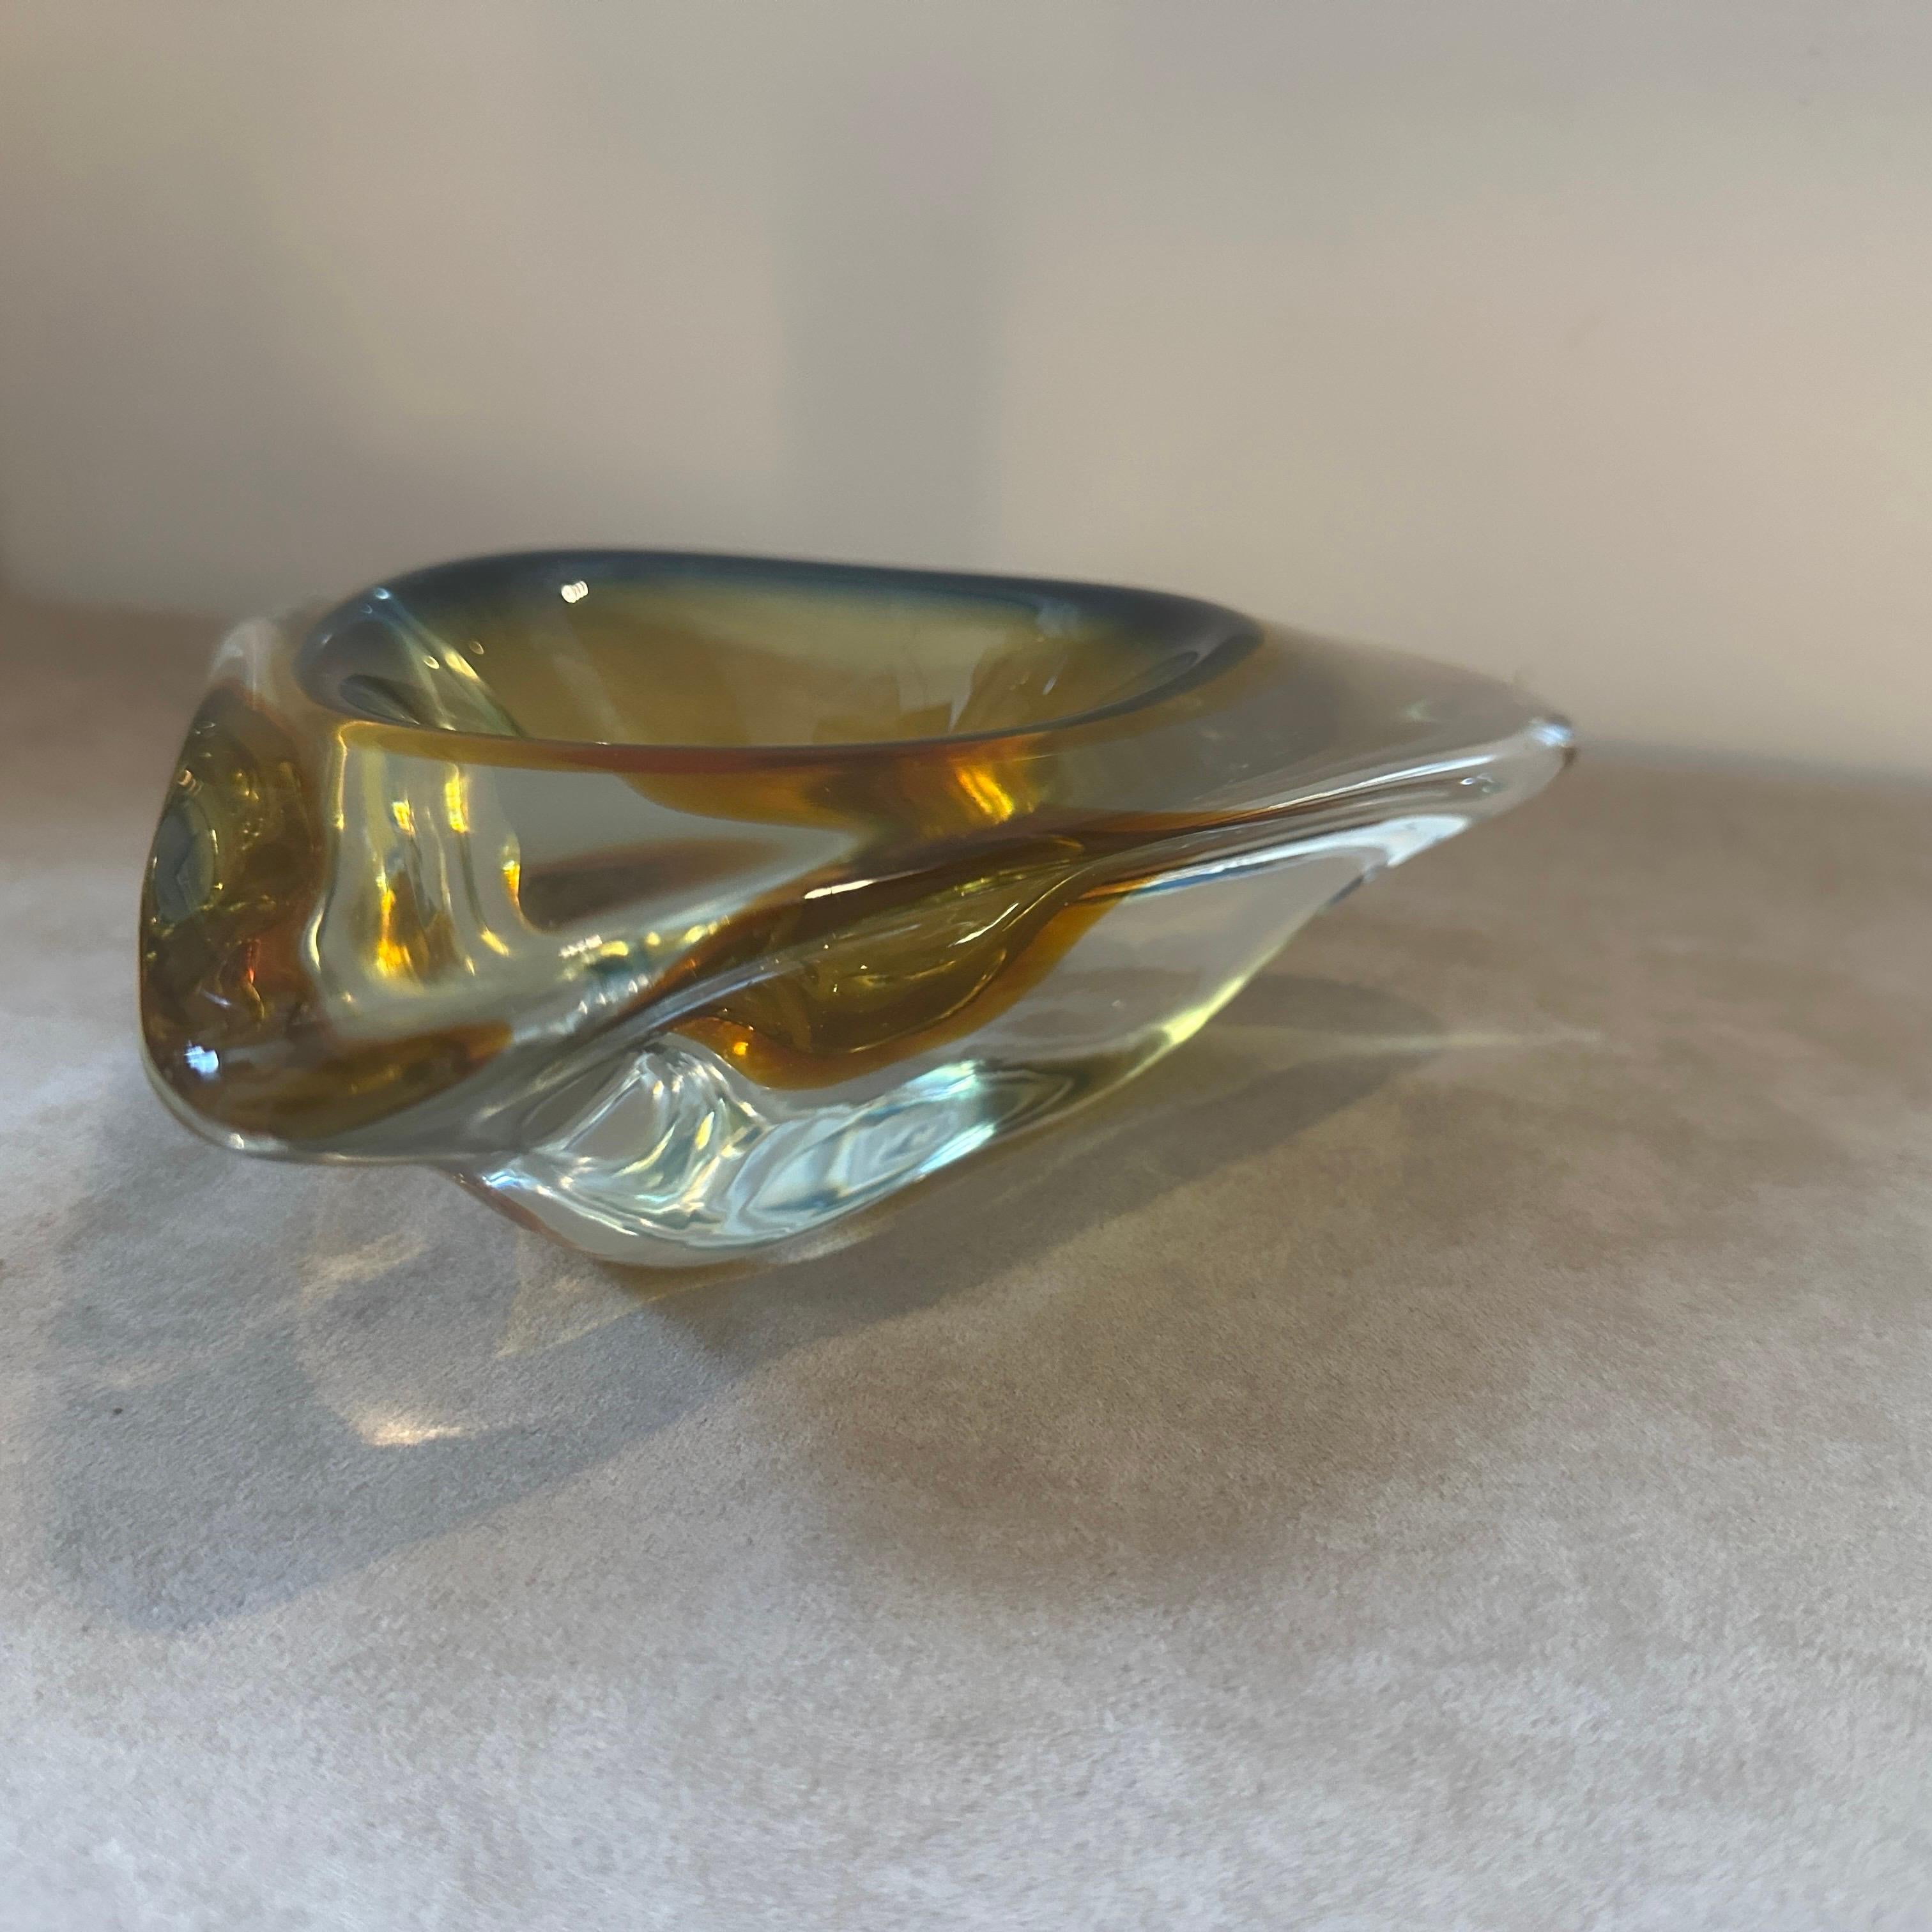 A 1960s Modernist Yellow Green Sommerso Murano Glass Ashtray by Seguso For Sale 3